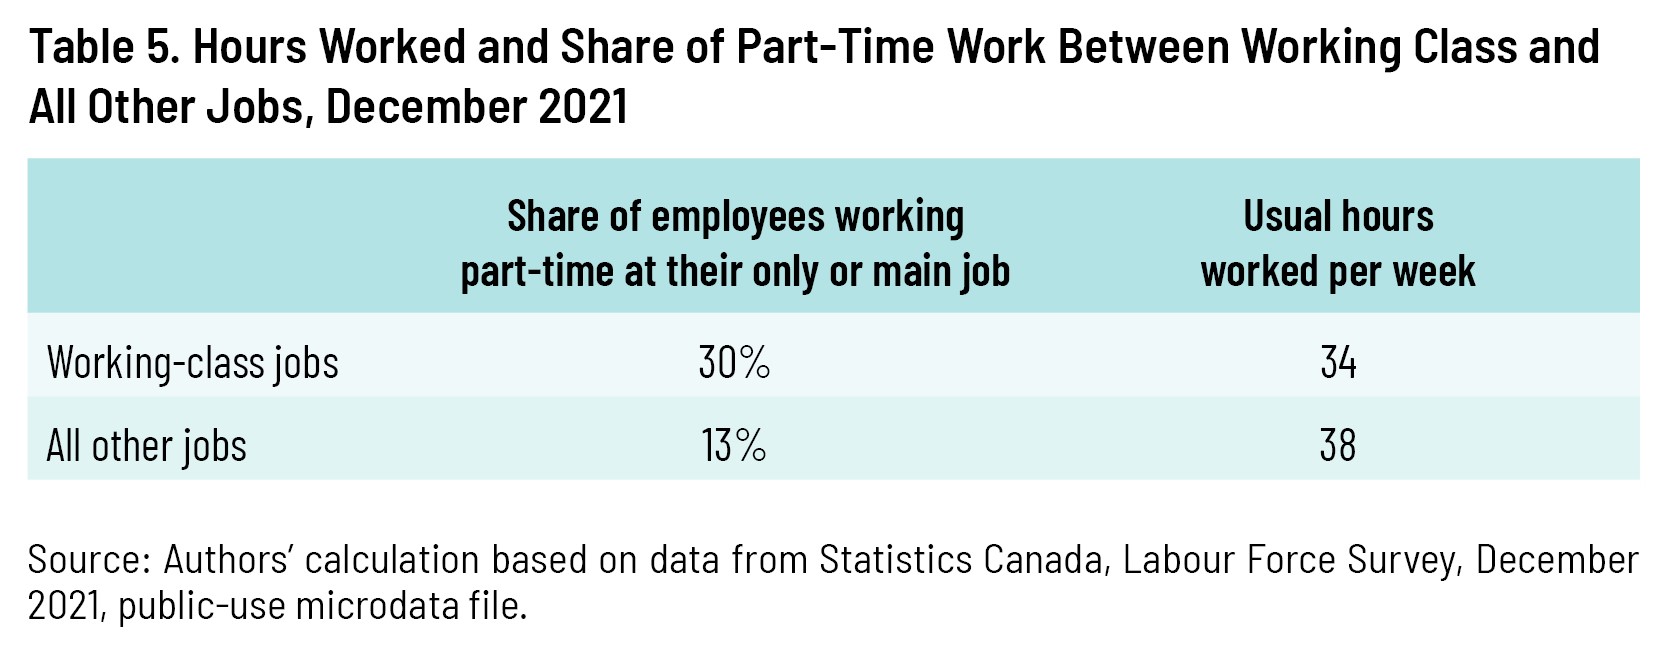 Table 5. Hours Worked and Share of Part-Time Work Between Working Class and Other Jobs, December 2021